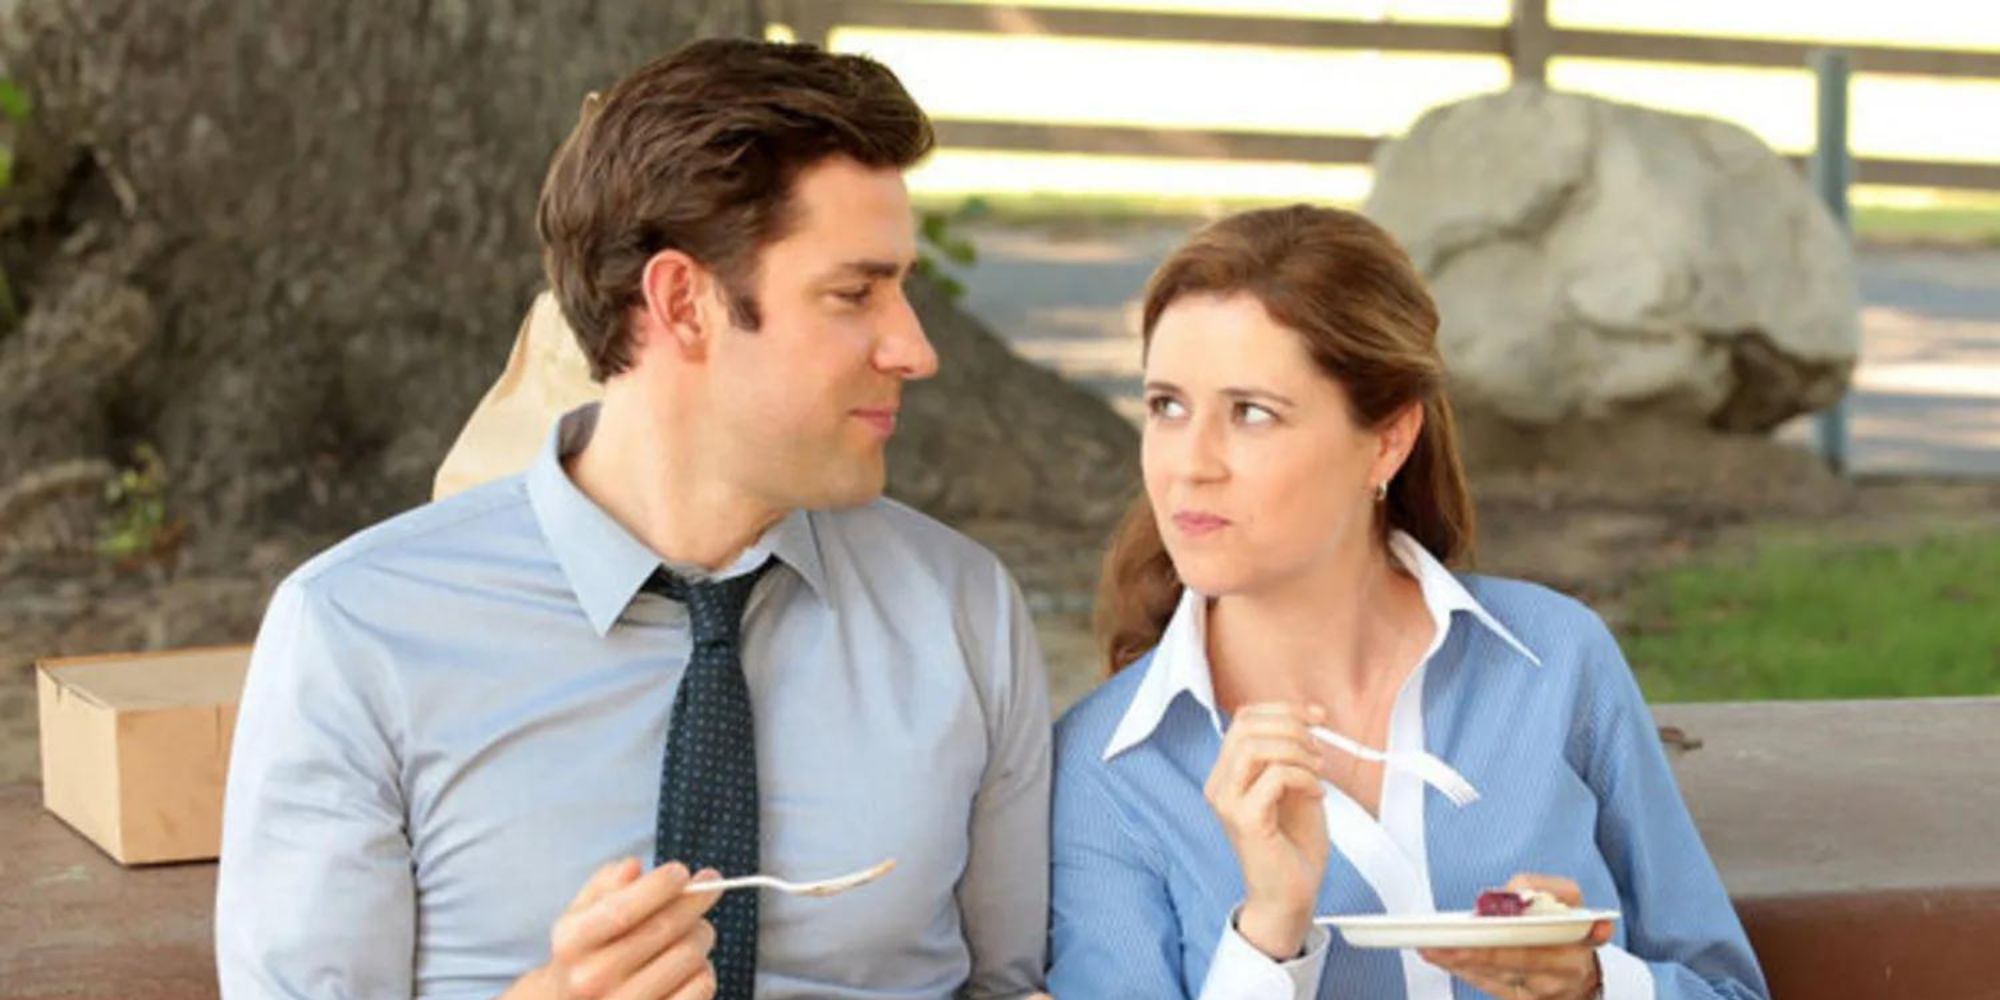 Jim and Pam from The Office eating lunch together